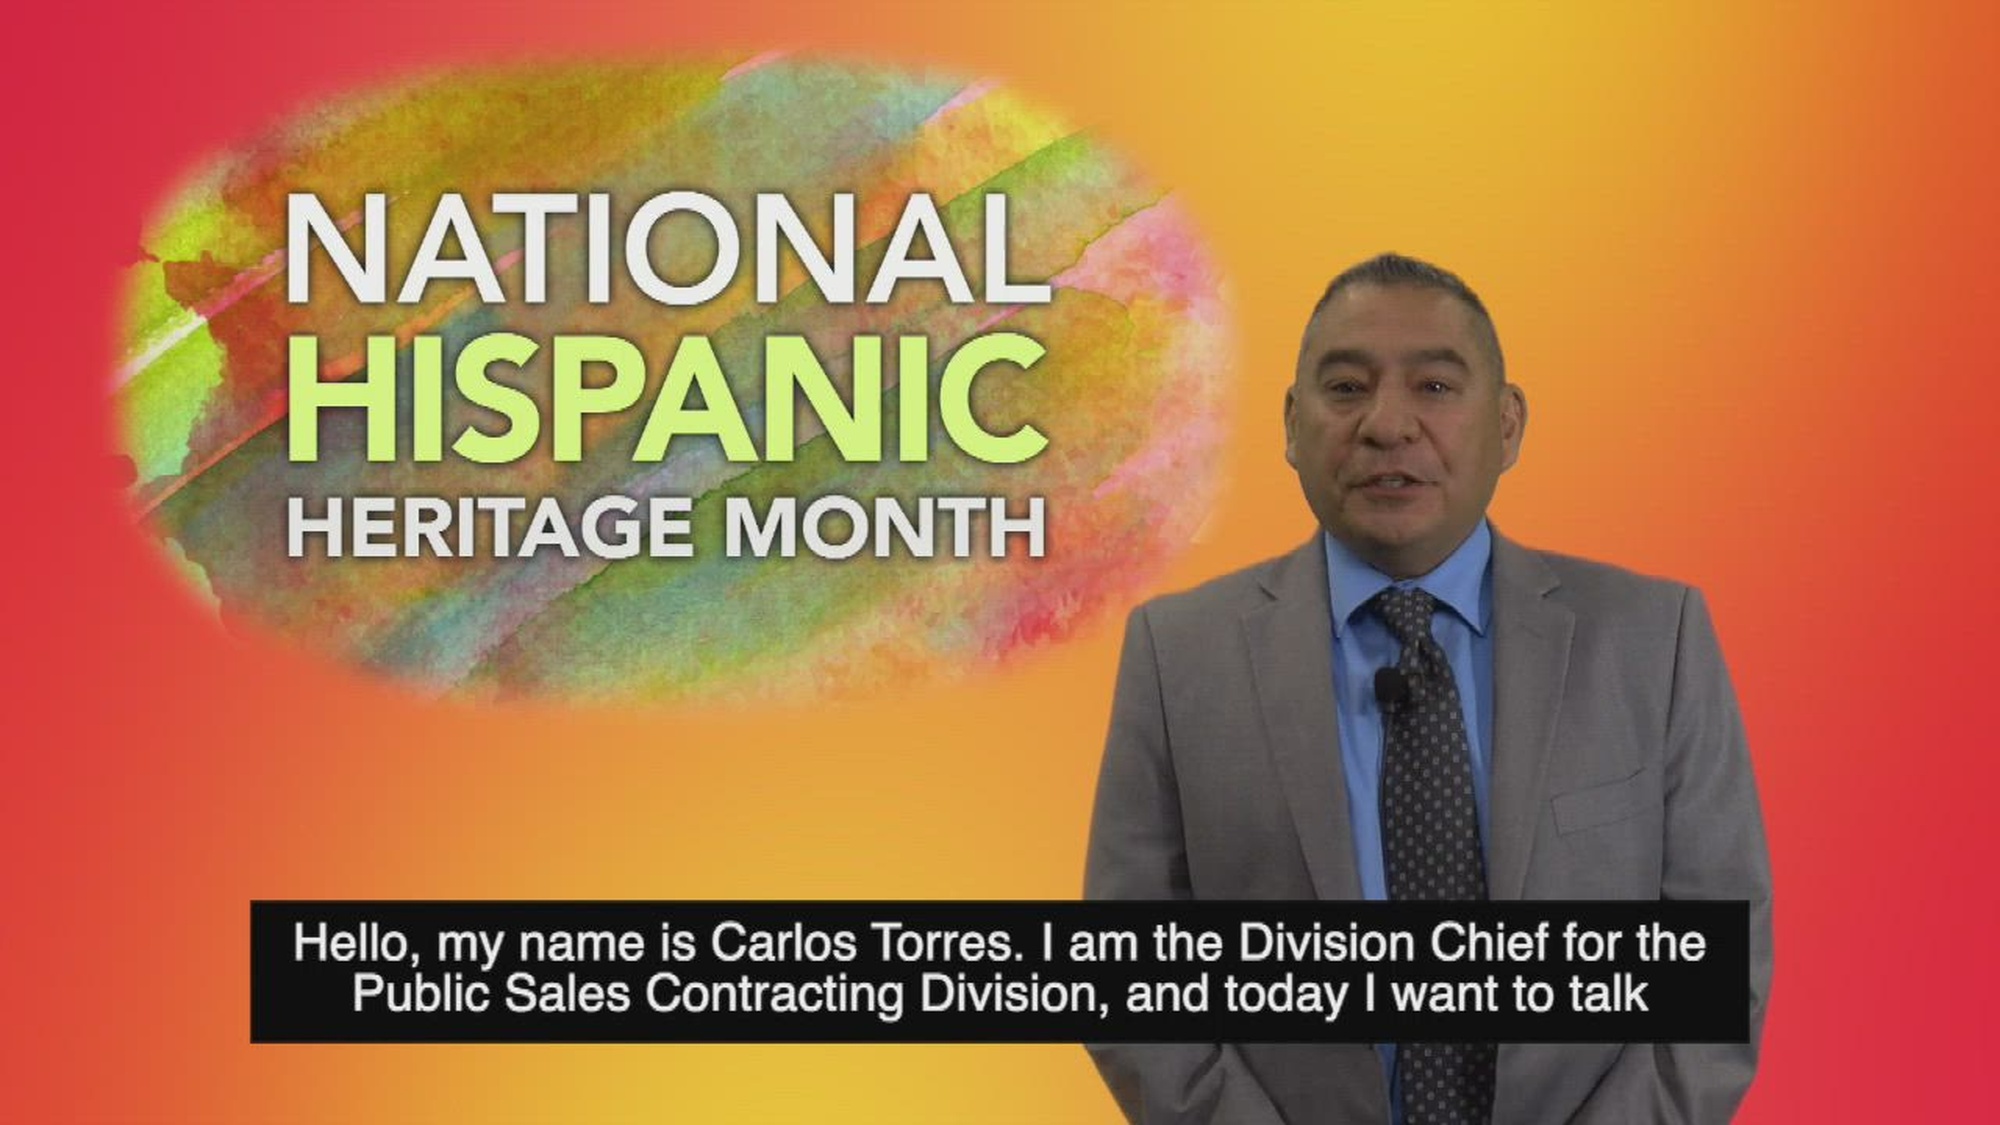 A civilian speaks in front of an orange background with the words "NATIONAL HISPANIC HERITAGE MONTH."